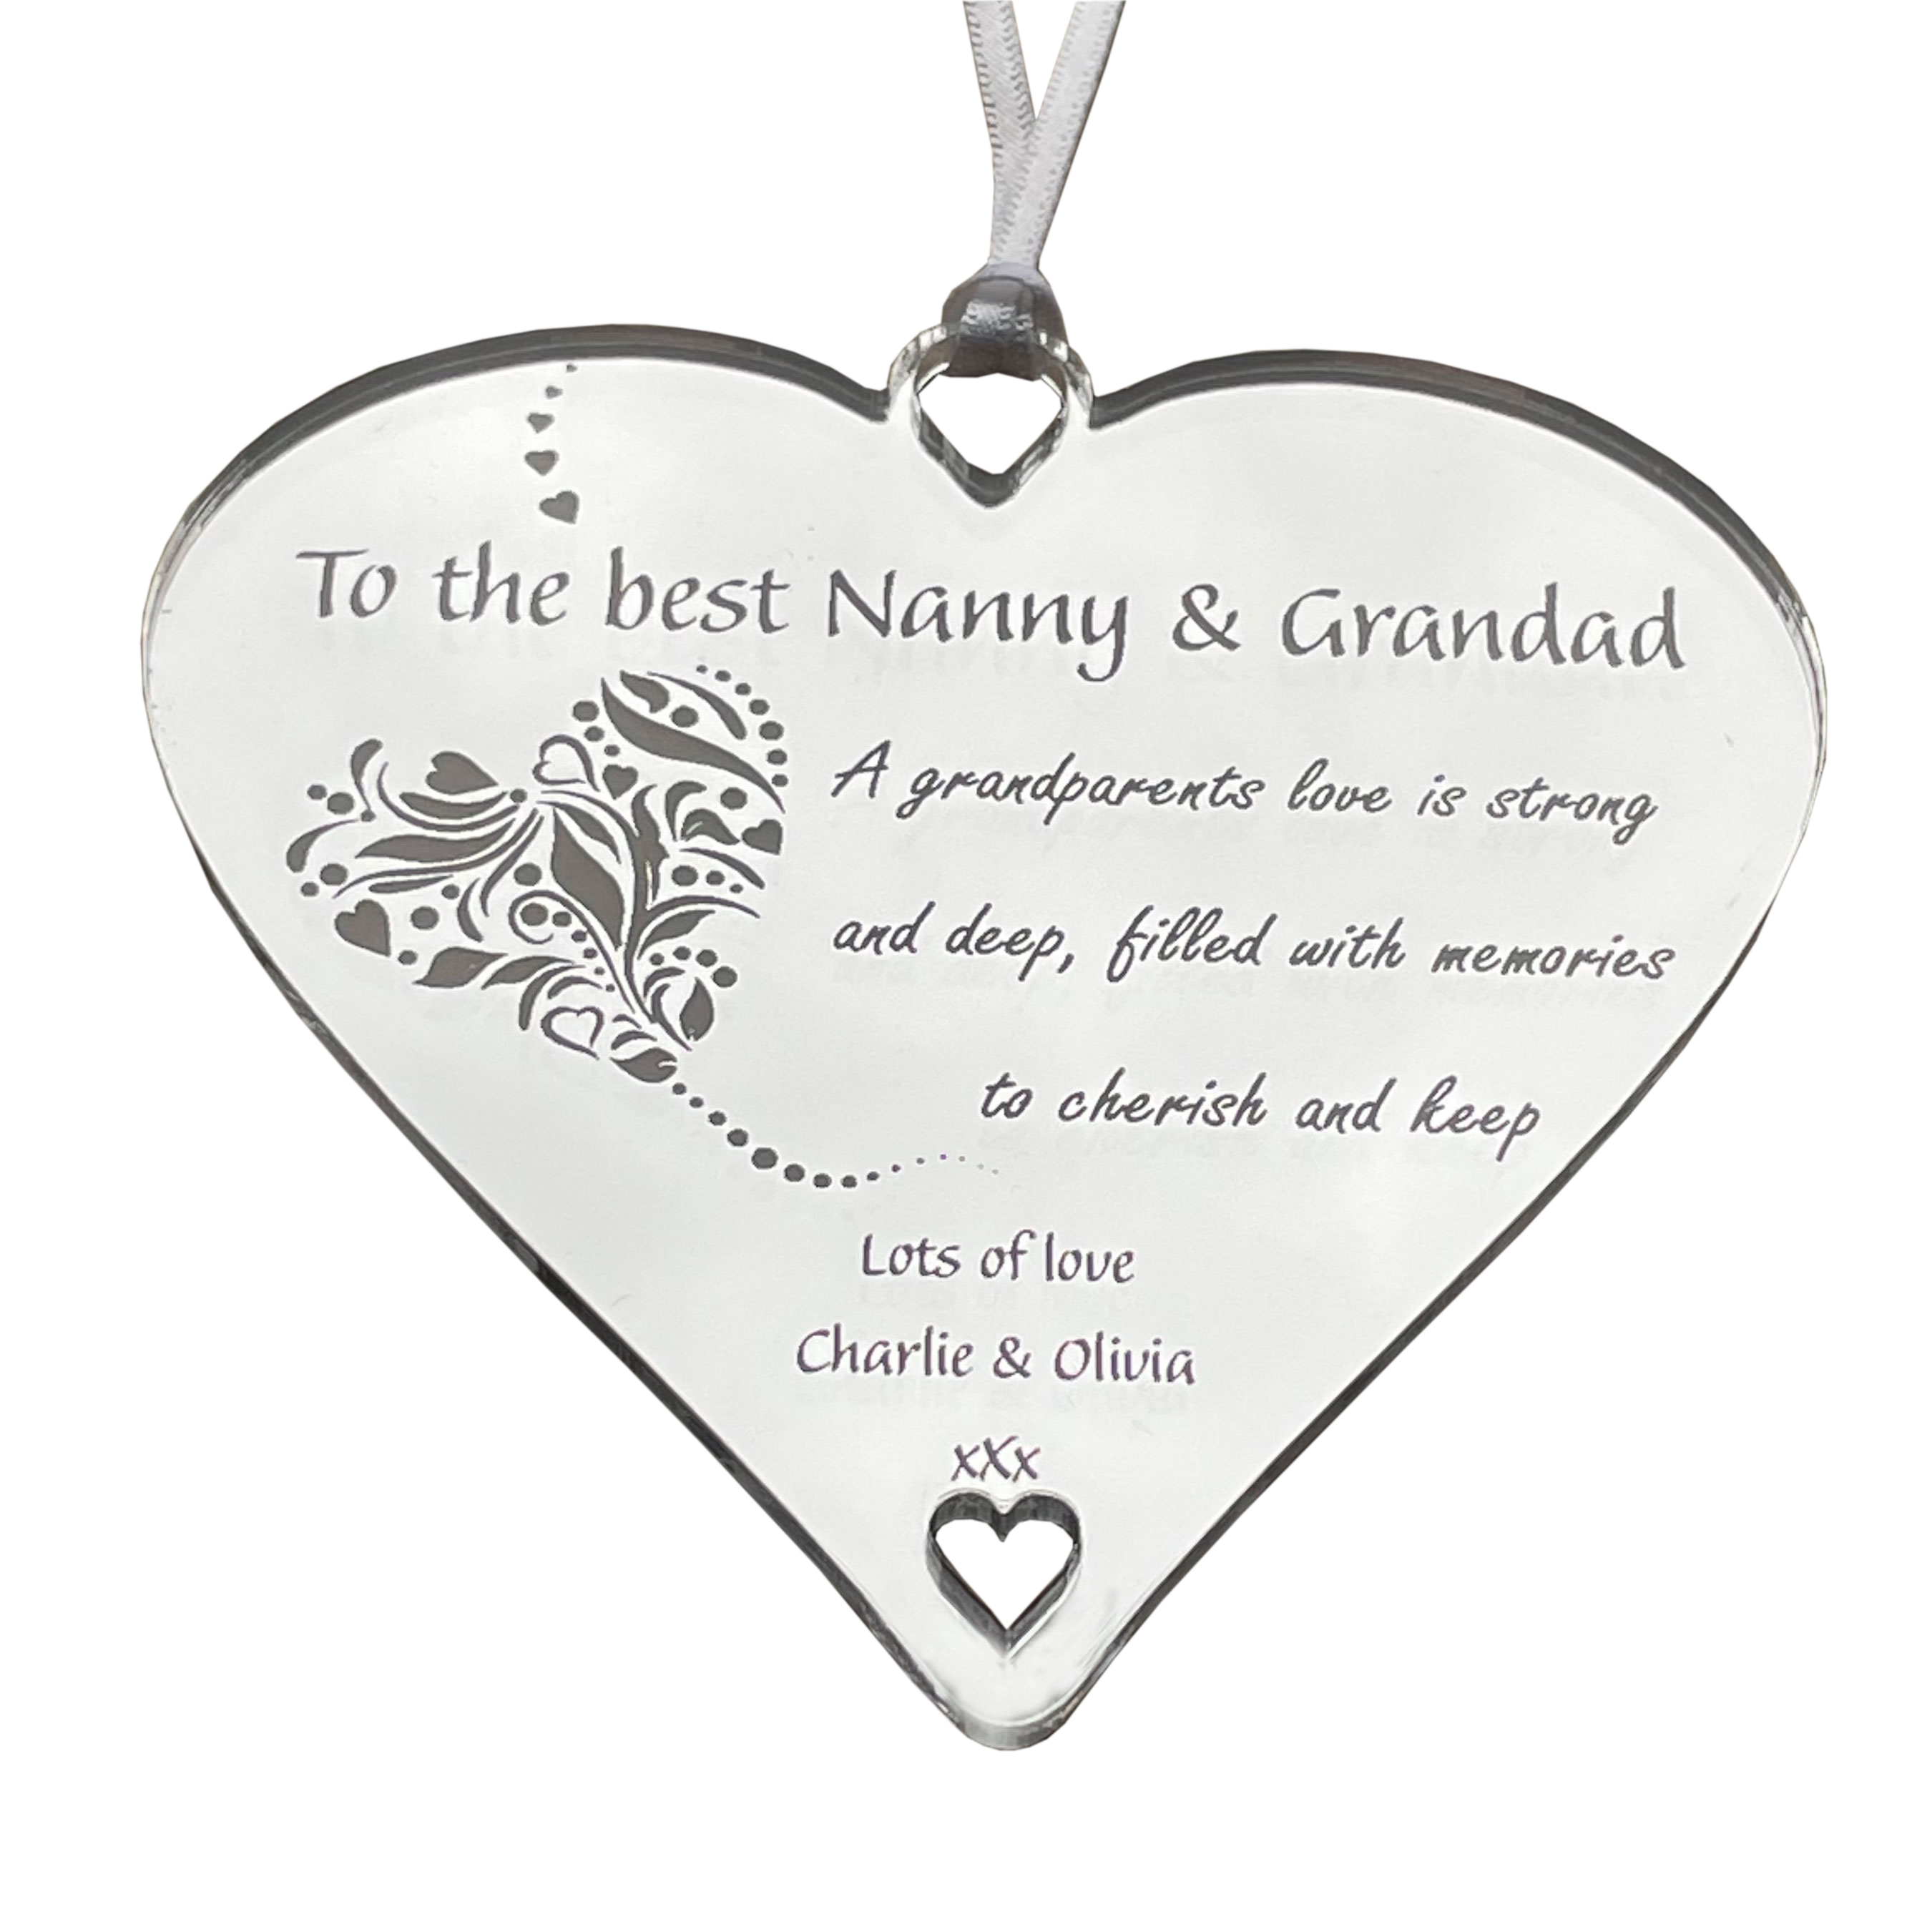 Personalised Gifts for Grandparents - 10cm Poem Heart